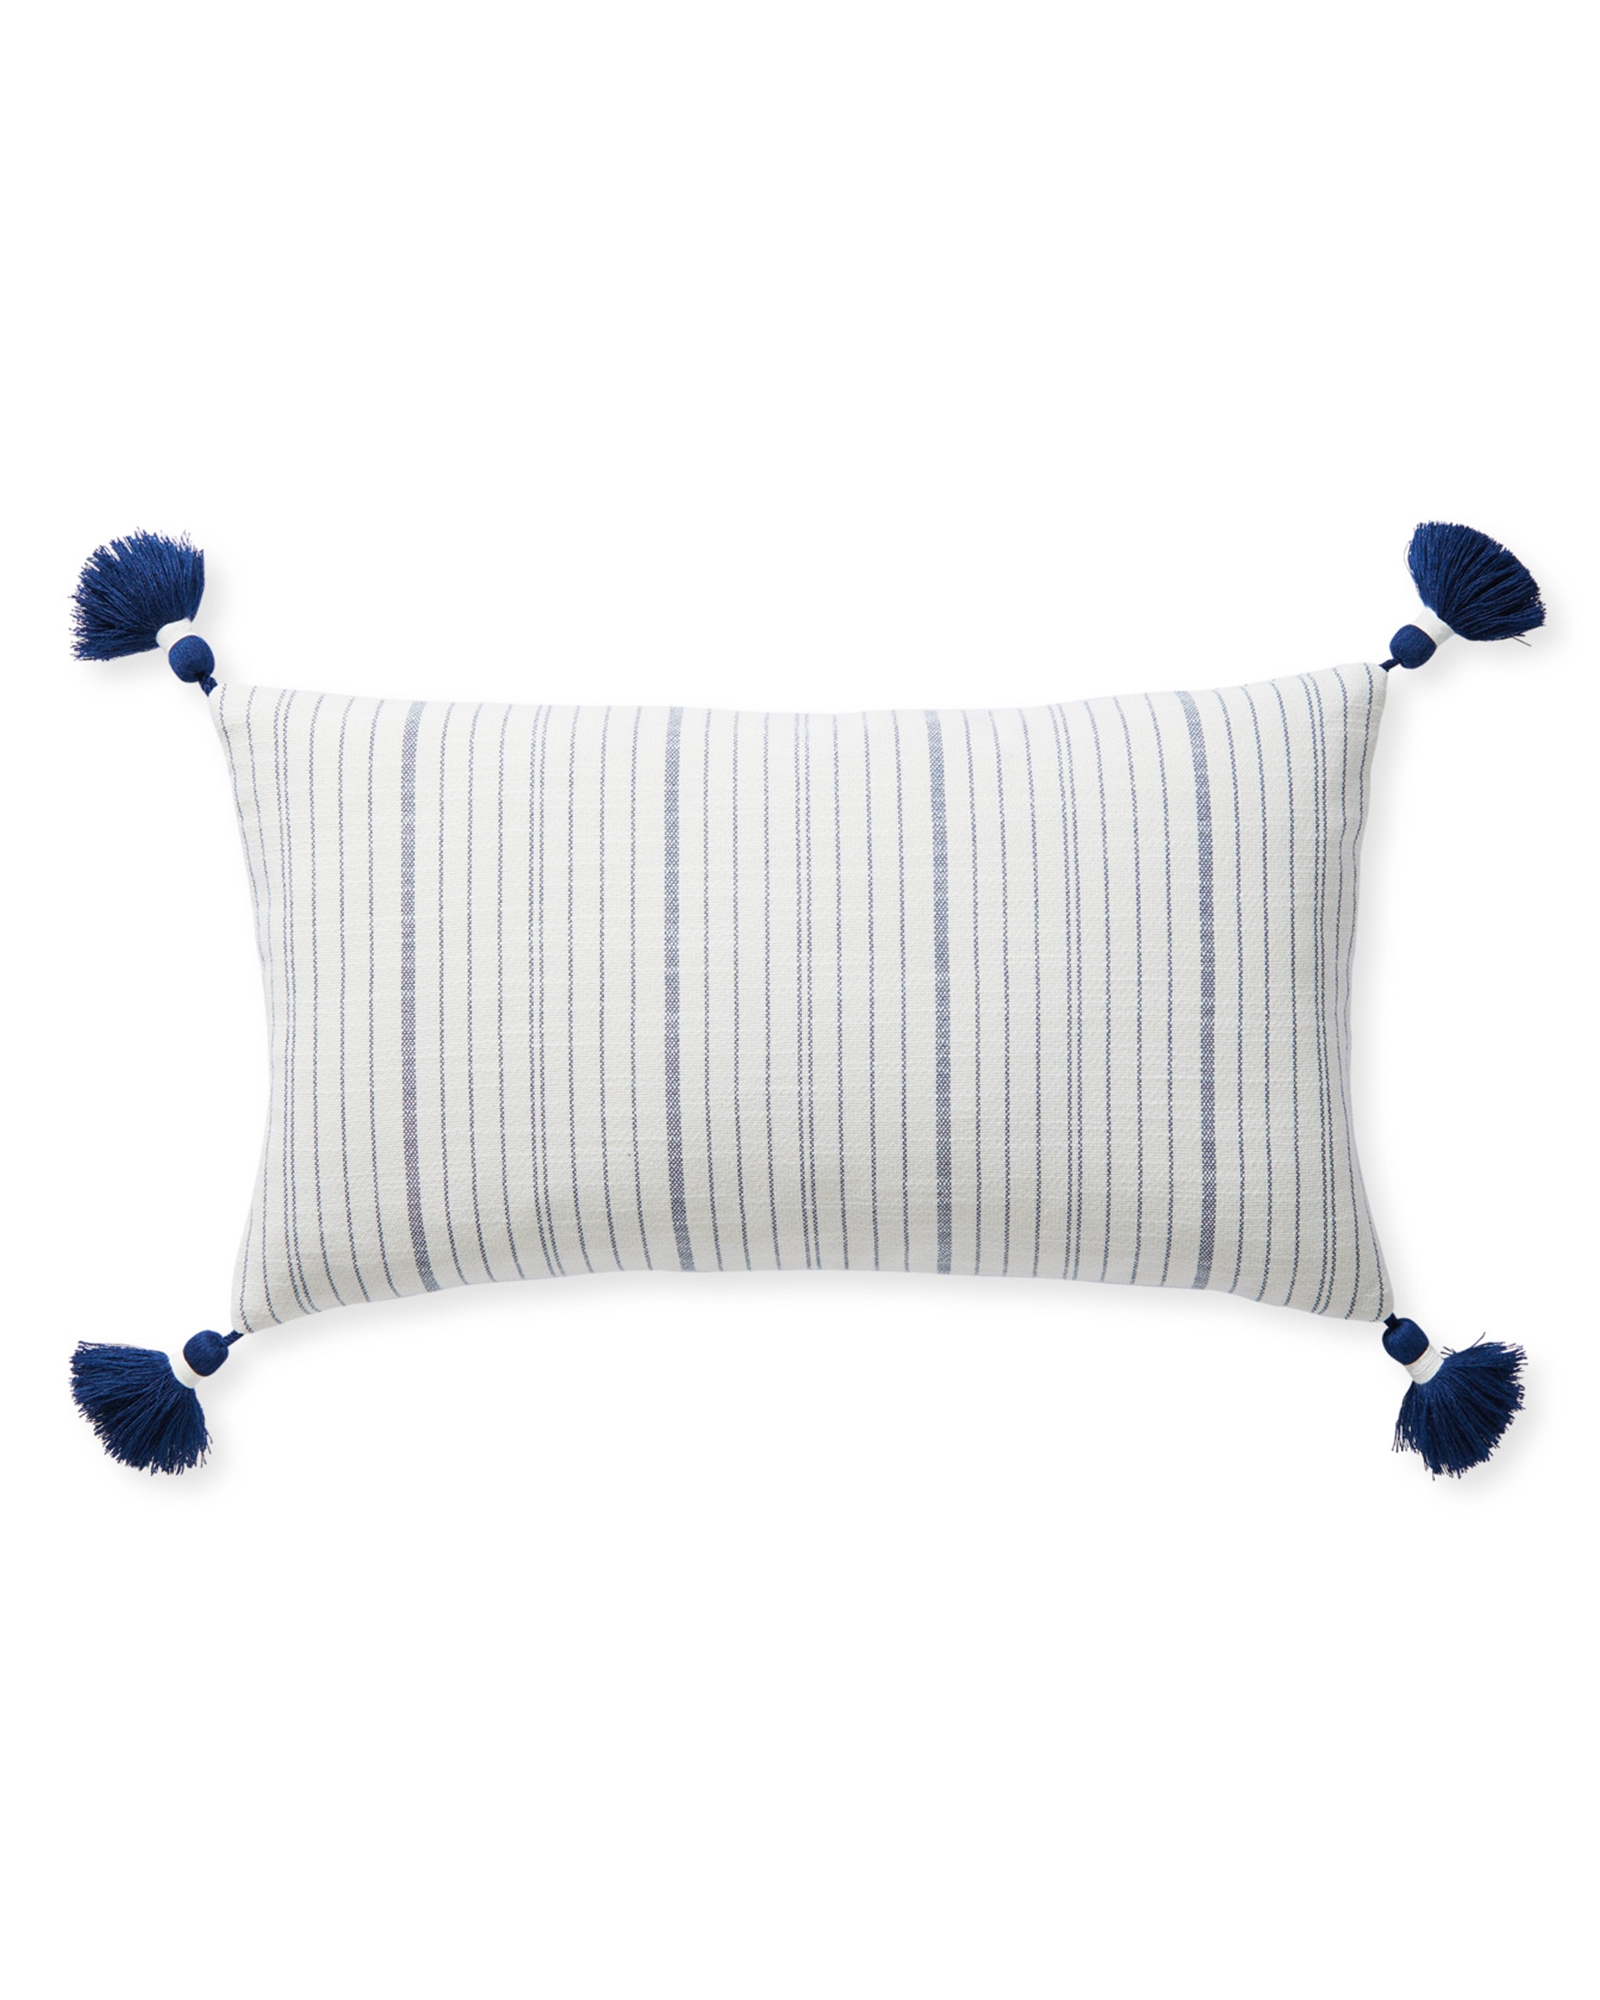 Surf Stripe Pillow Cover - Navy - 12x21 - Image 0